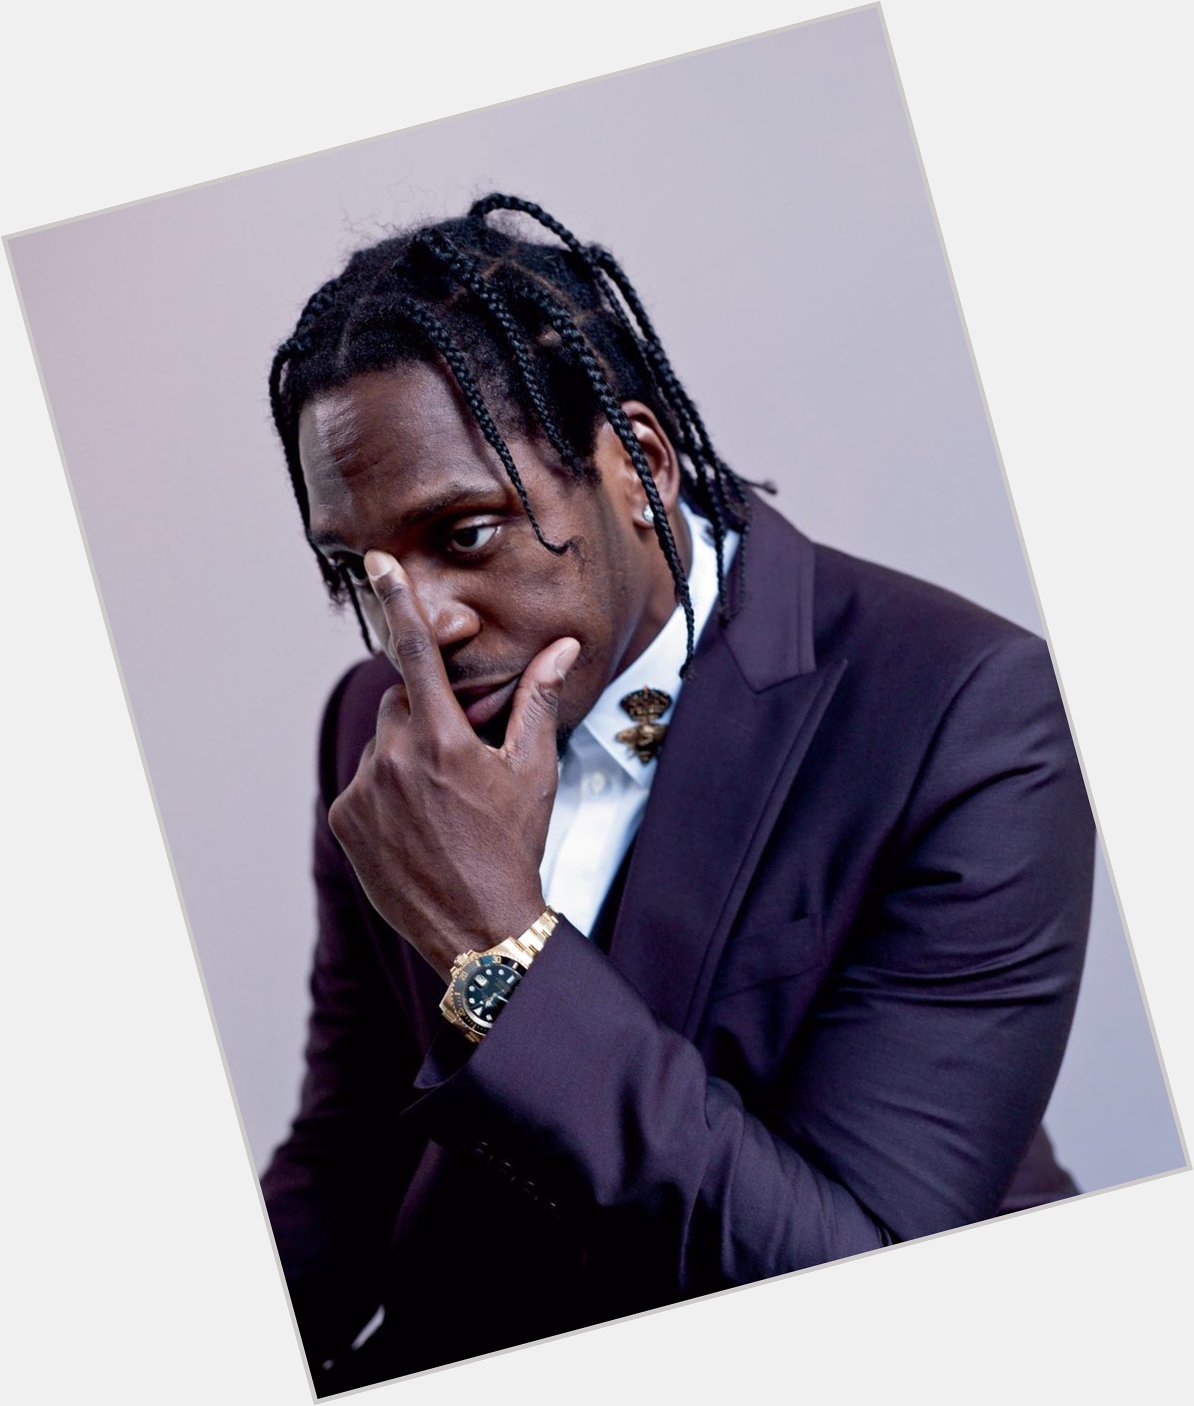 Happy 43rd Birthday to Pusha T. 

What s your favourite song by him? 